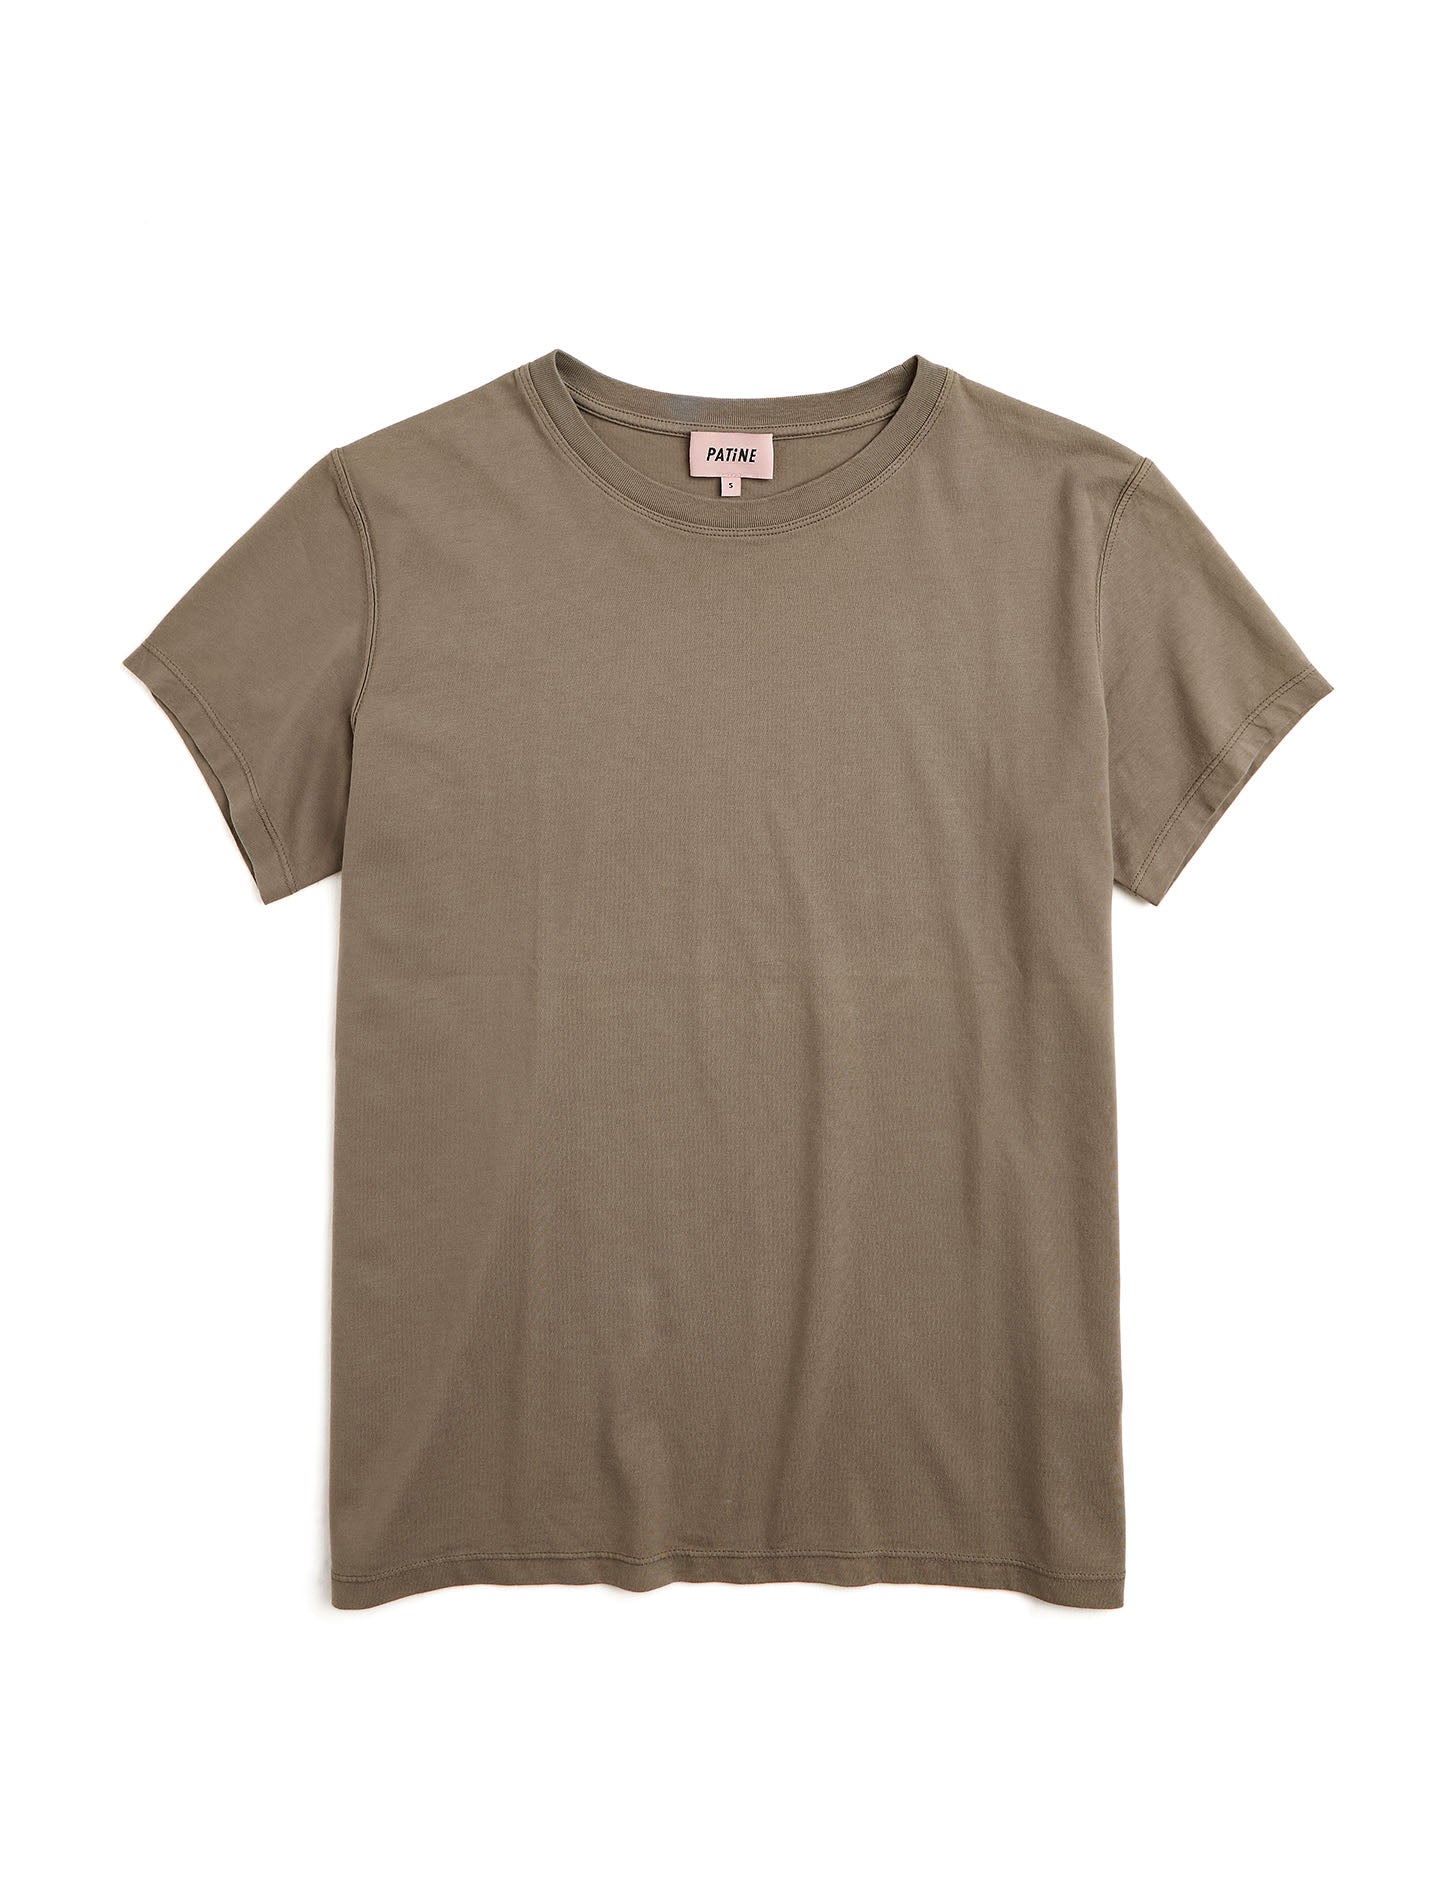 Le tee-shirt Iconic Willie® jersey bio-recyclé Dark olive